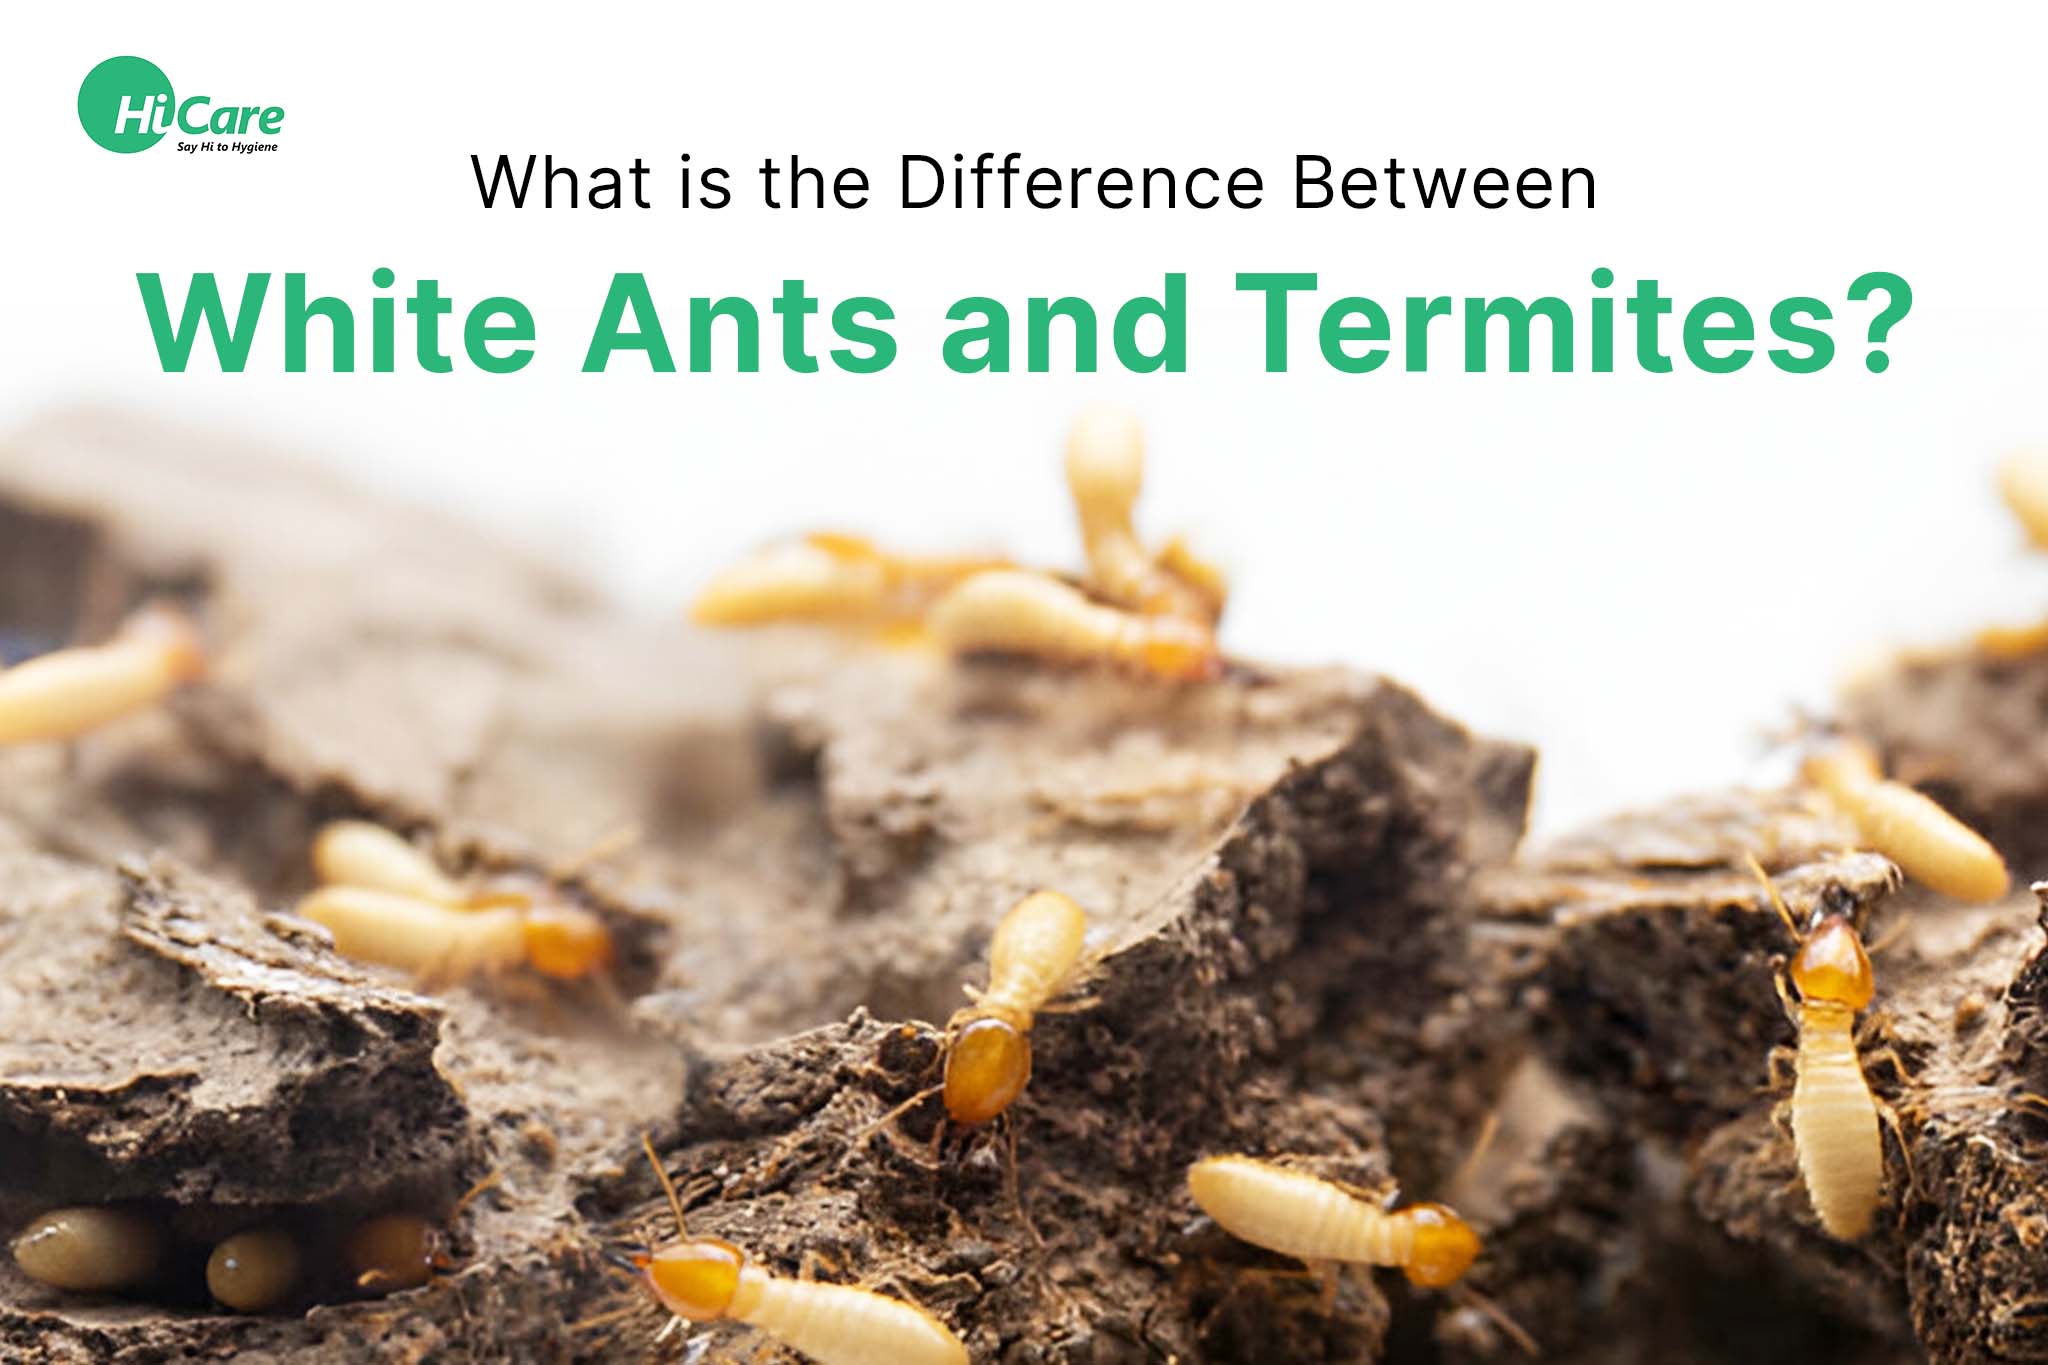 What is the Difference Between White Ants and Termites?